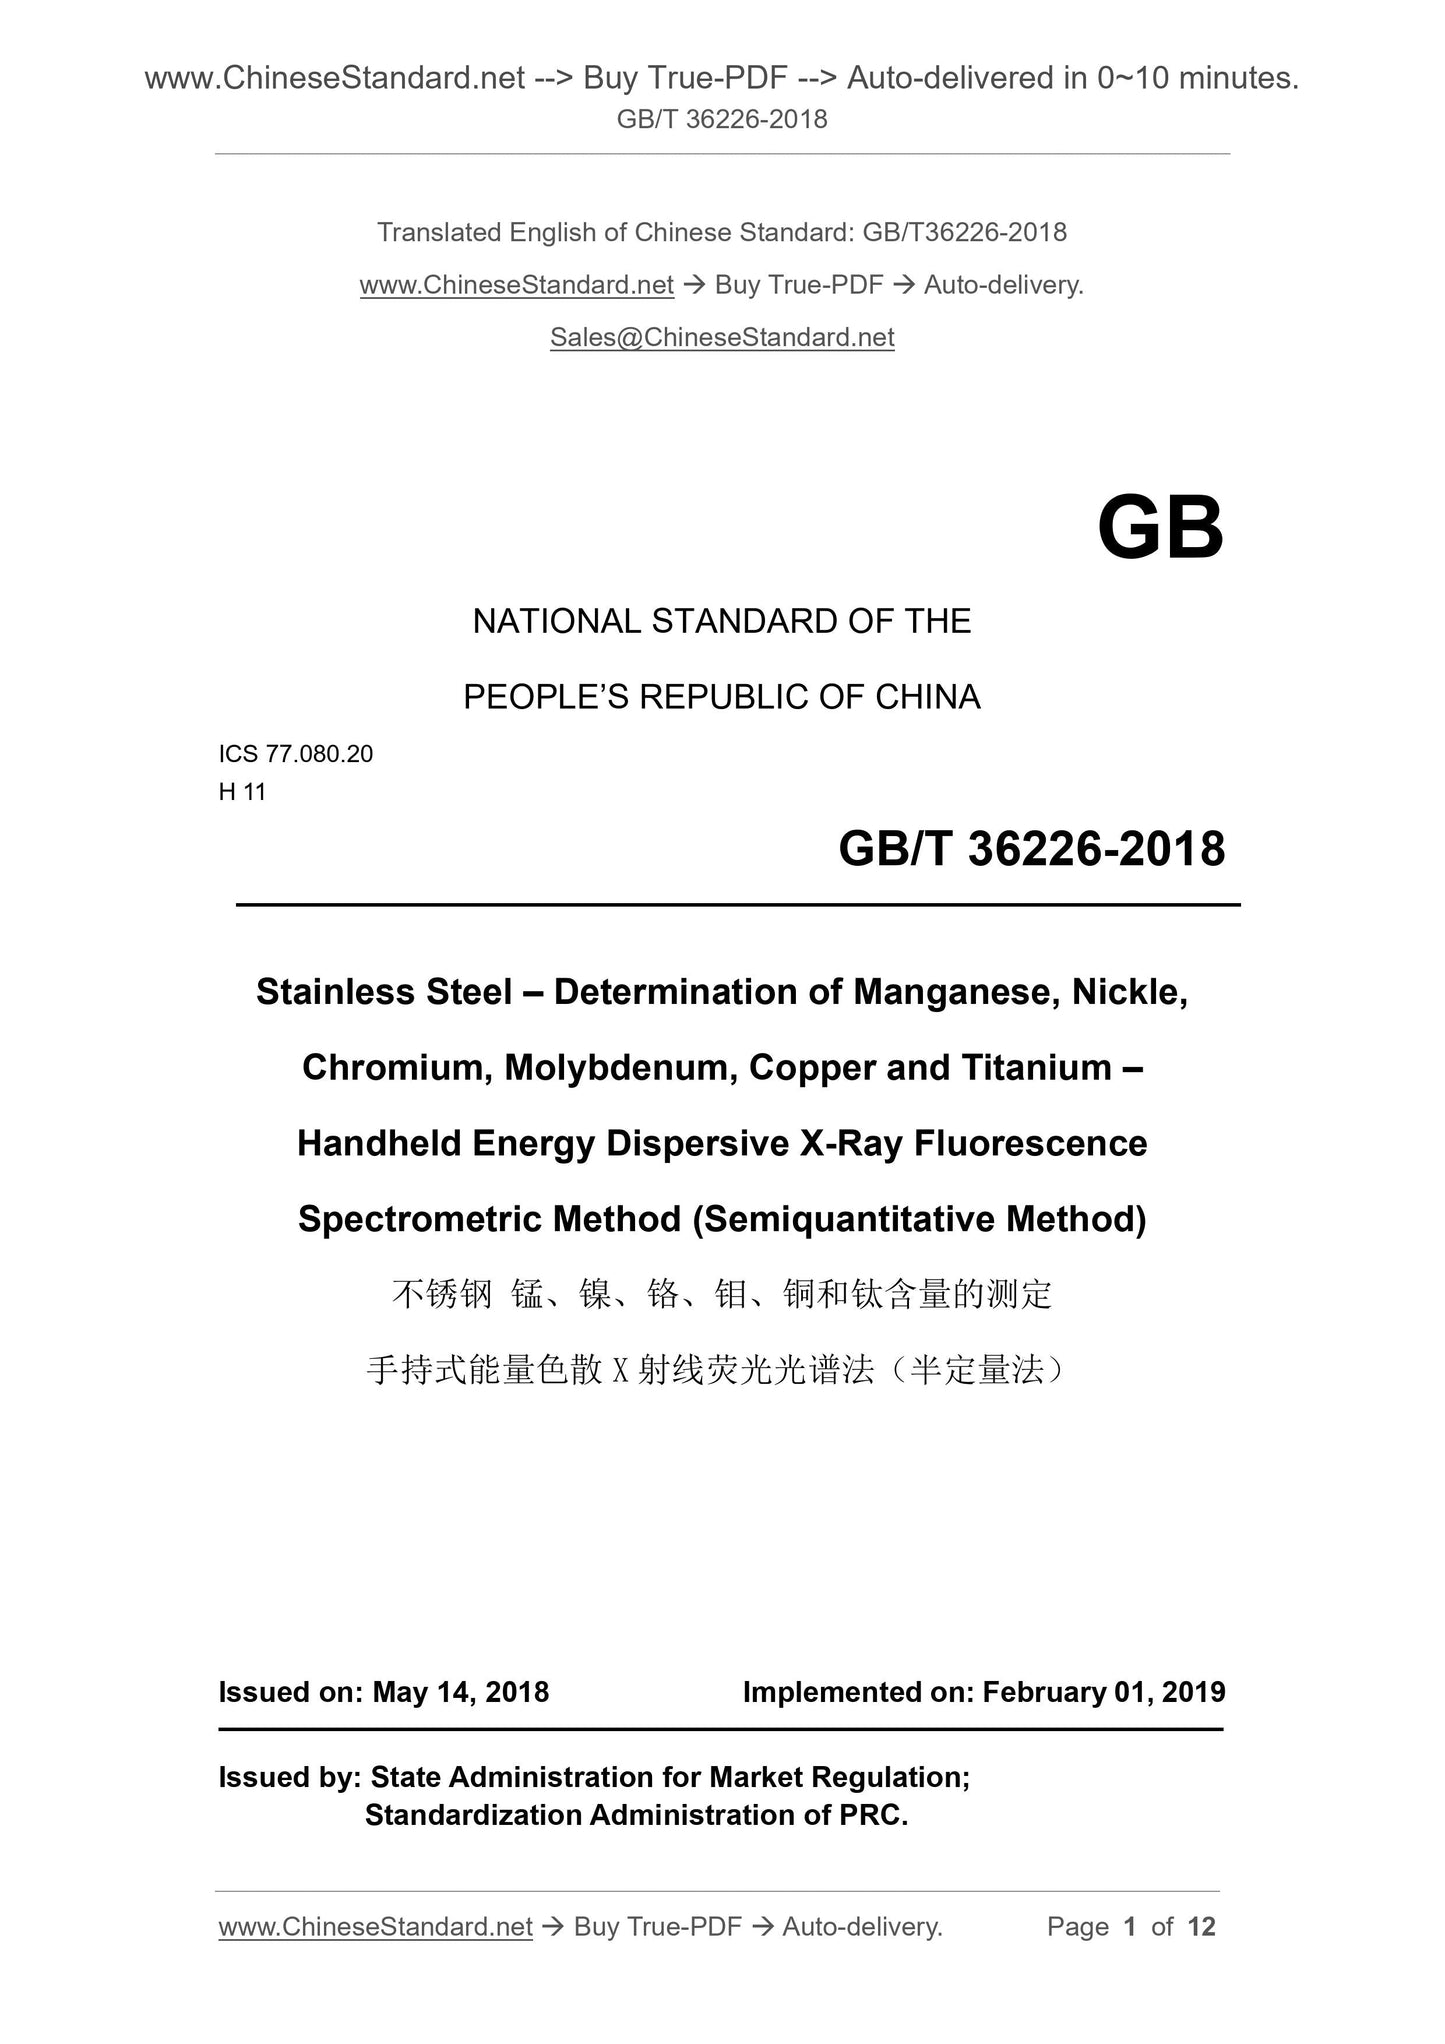 GB/T 36226-2018 Page 1